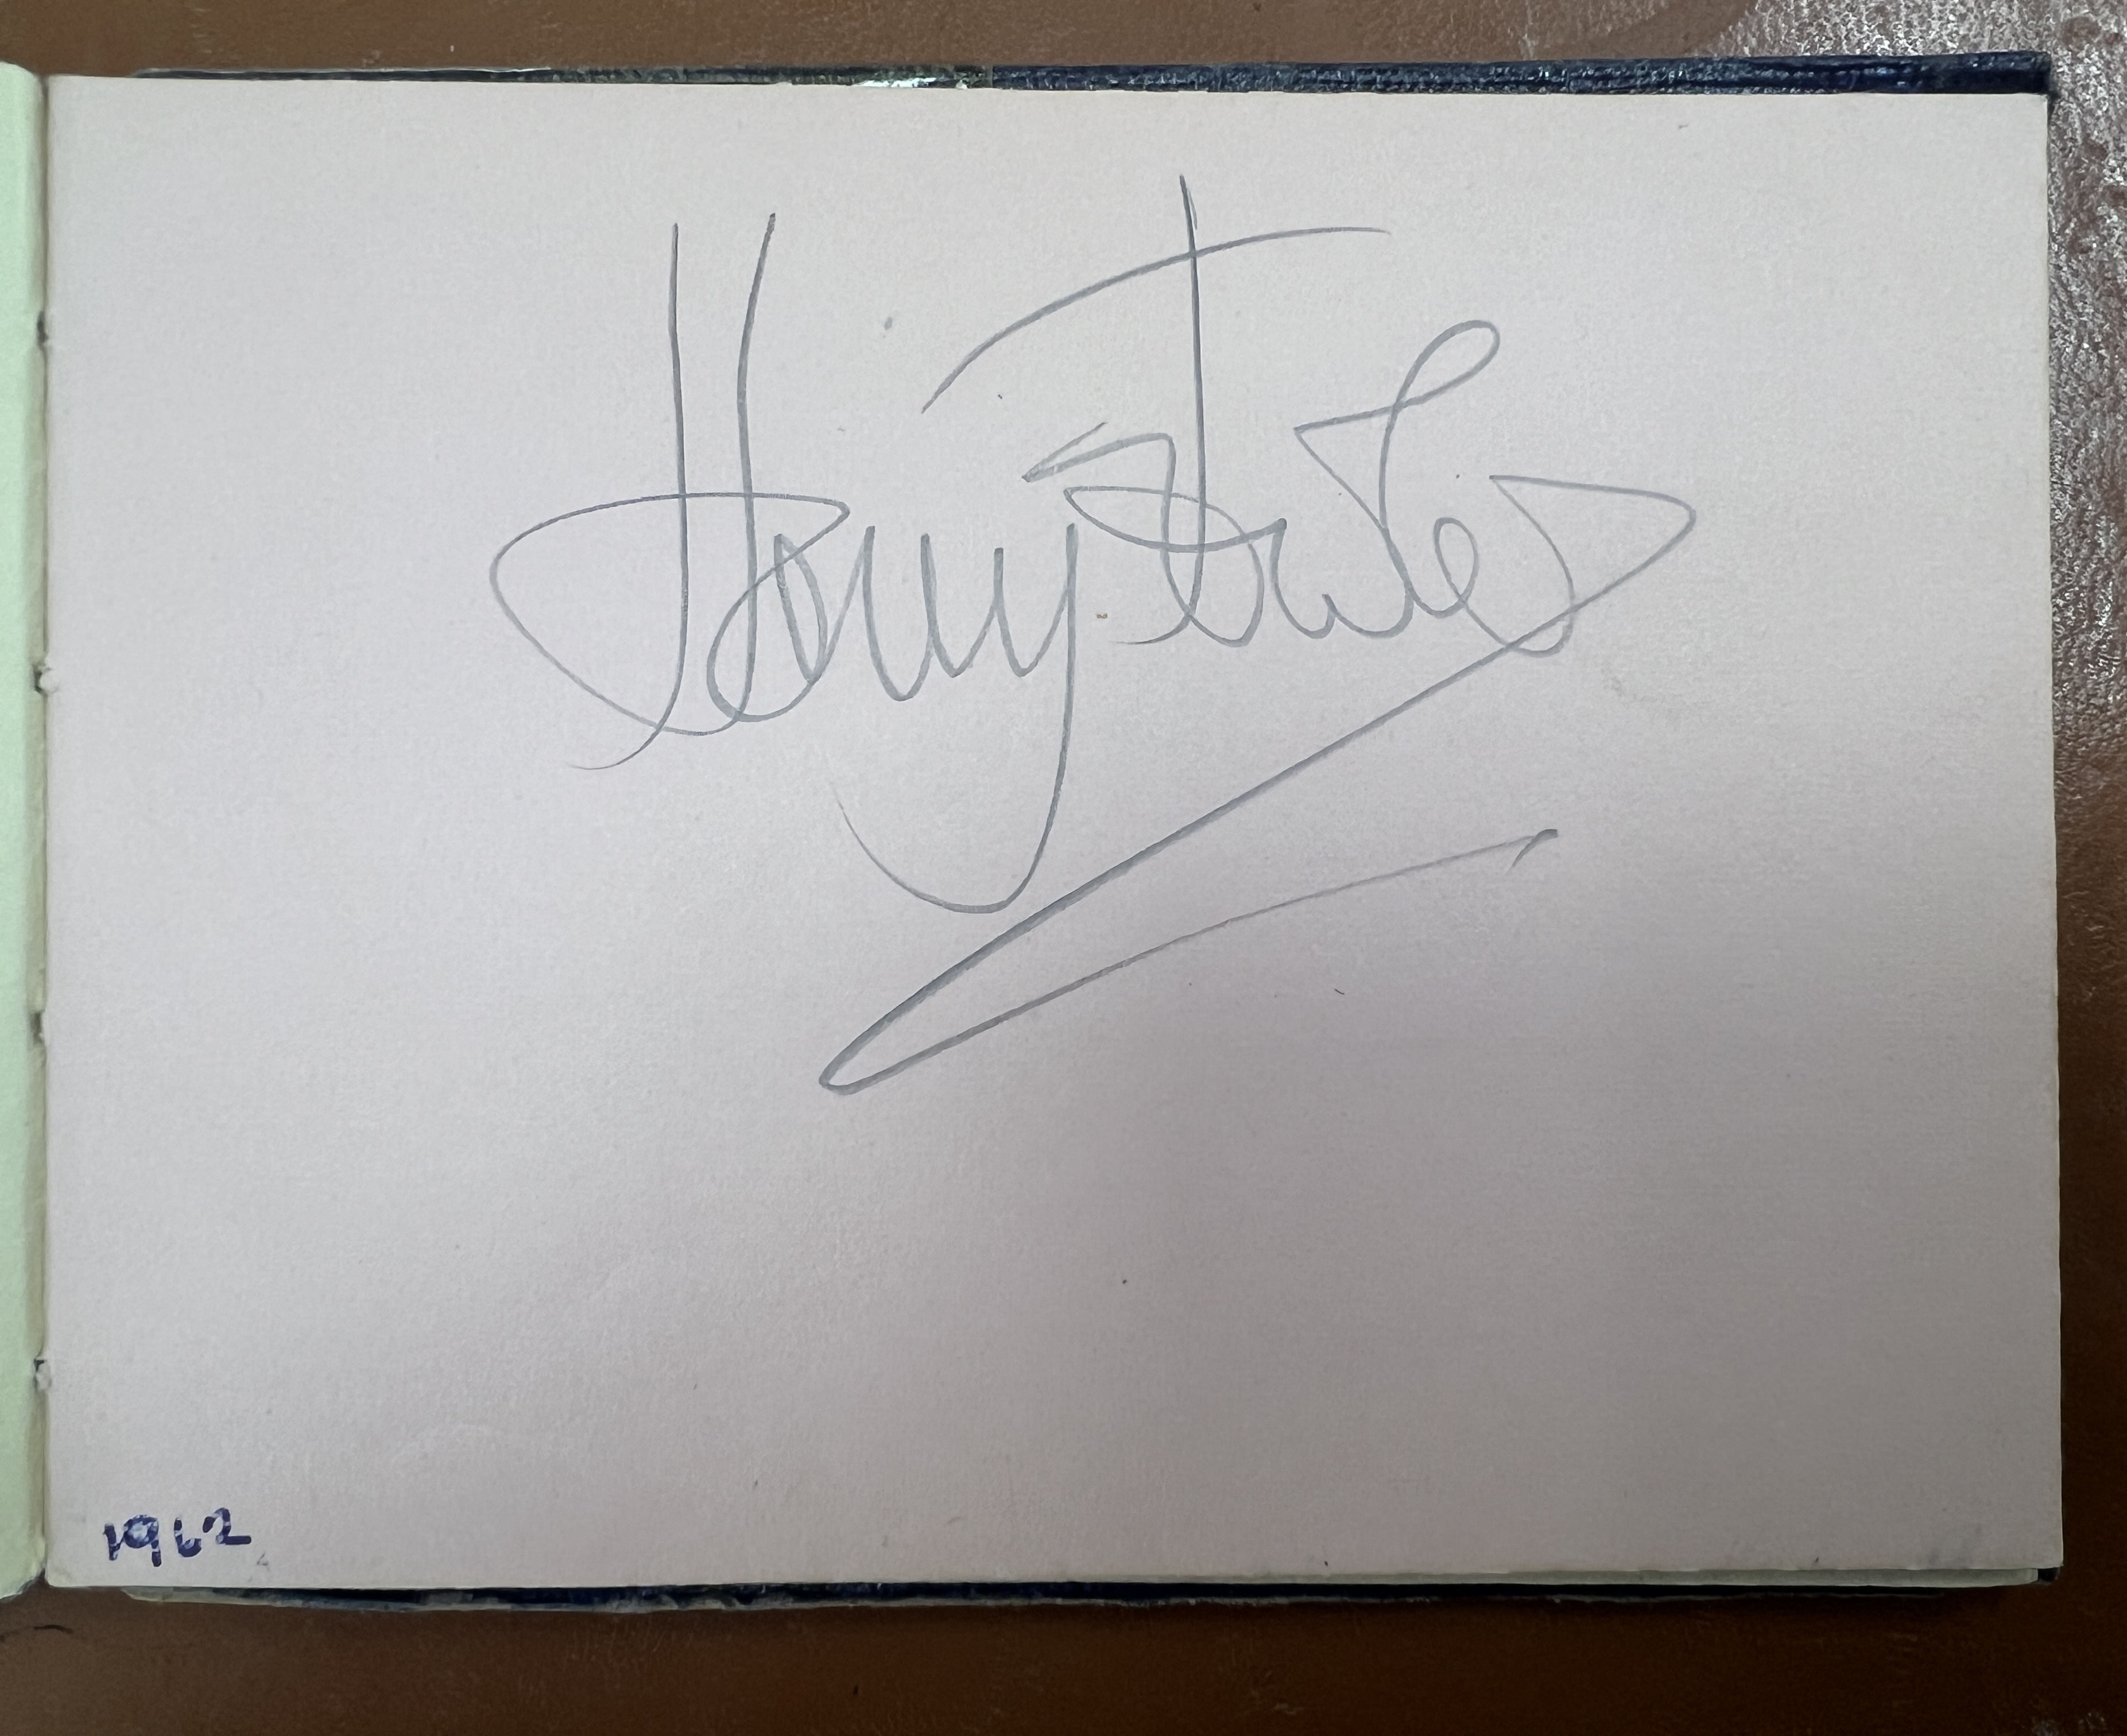 A 1960's autograph album containing autographs of various celebrities including Cliff Richard, - Image 20 of 37